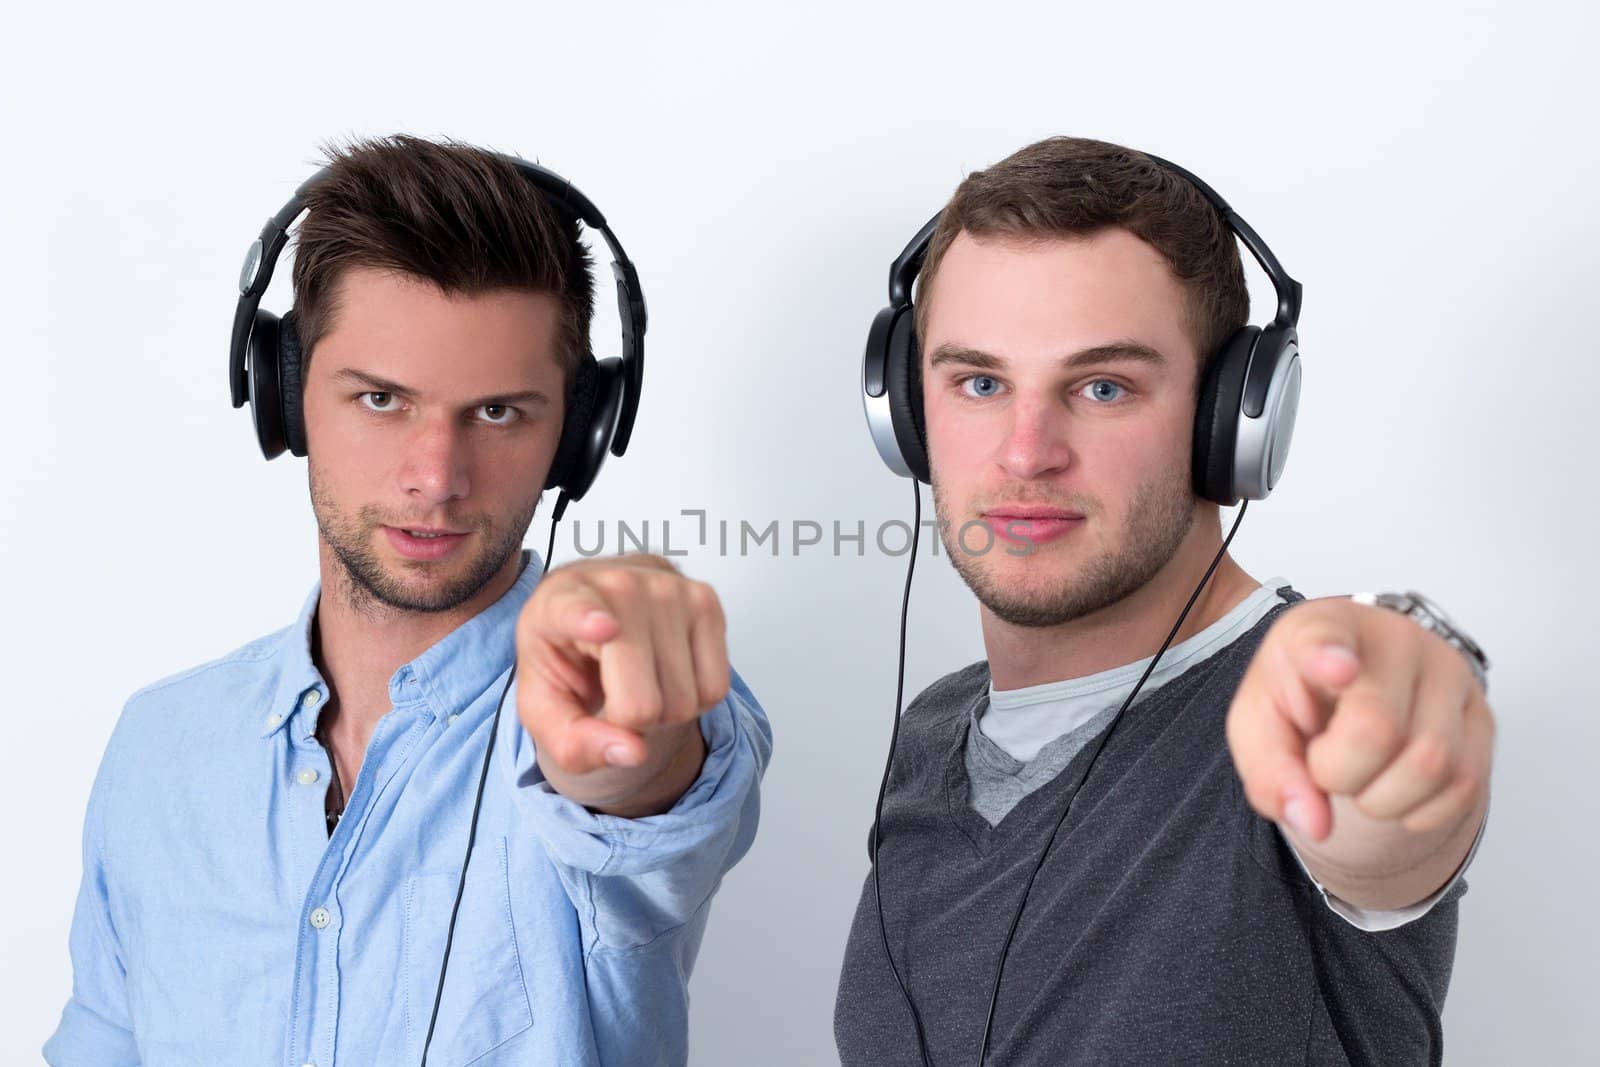 Two friends with headphone listening to music in front of a white background and pointing at camera